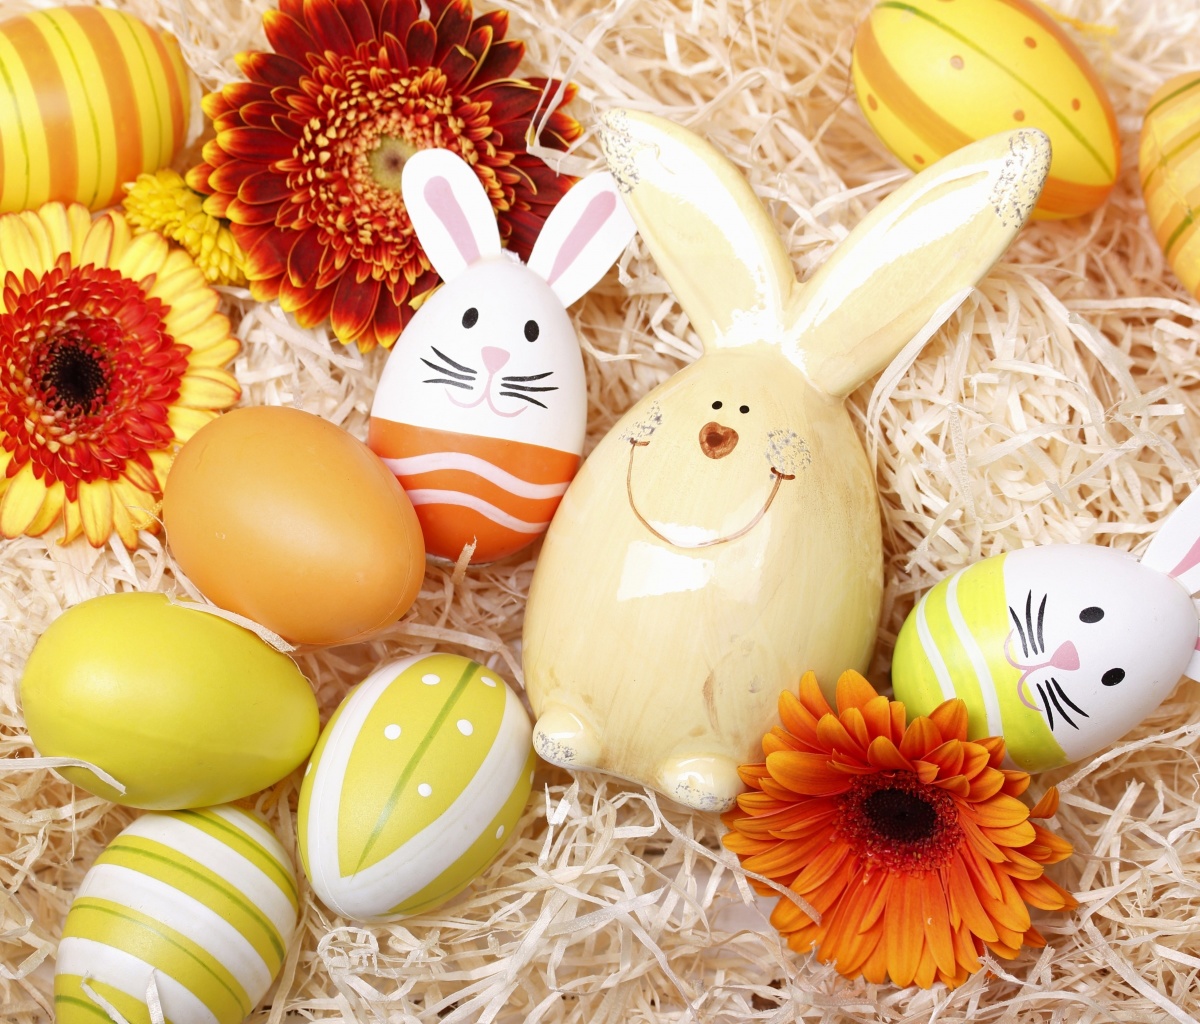 Das Easter Eggs Decoration with Hare Wallpaper 1200x1024